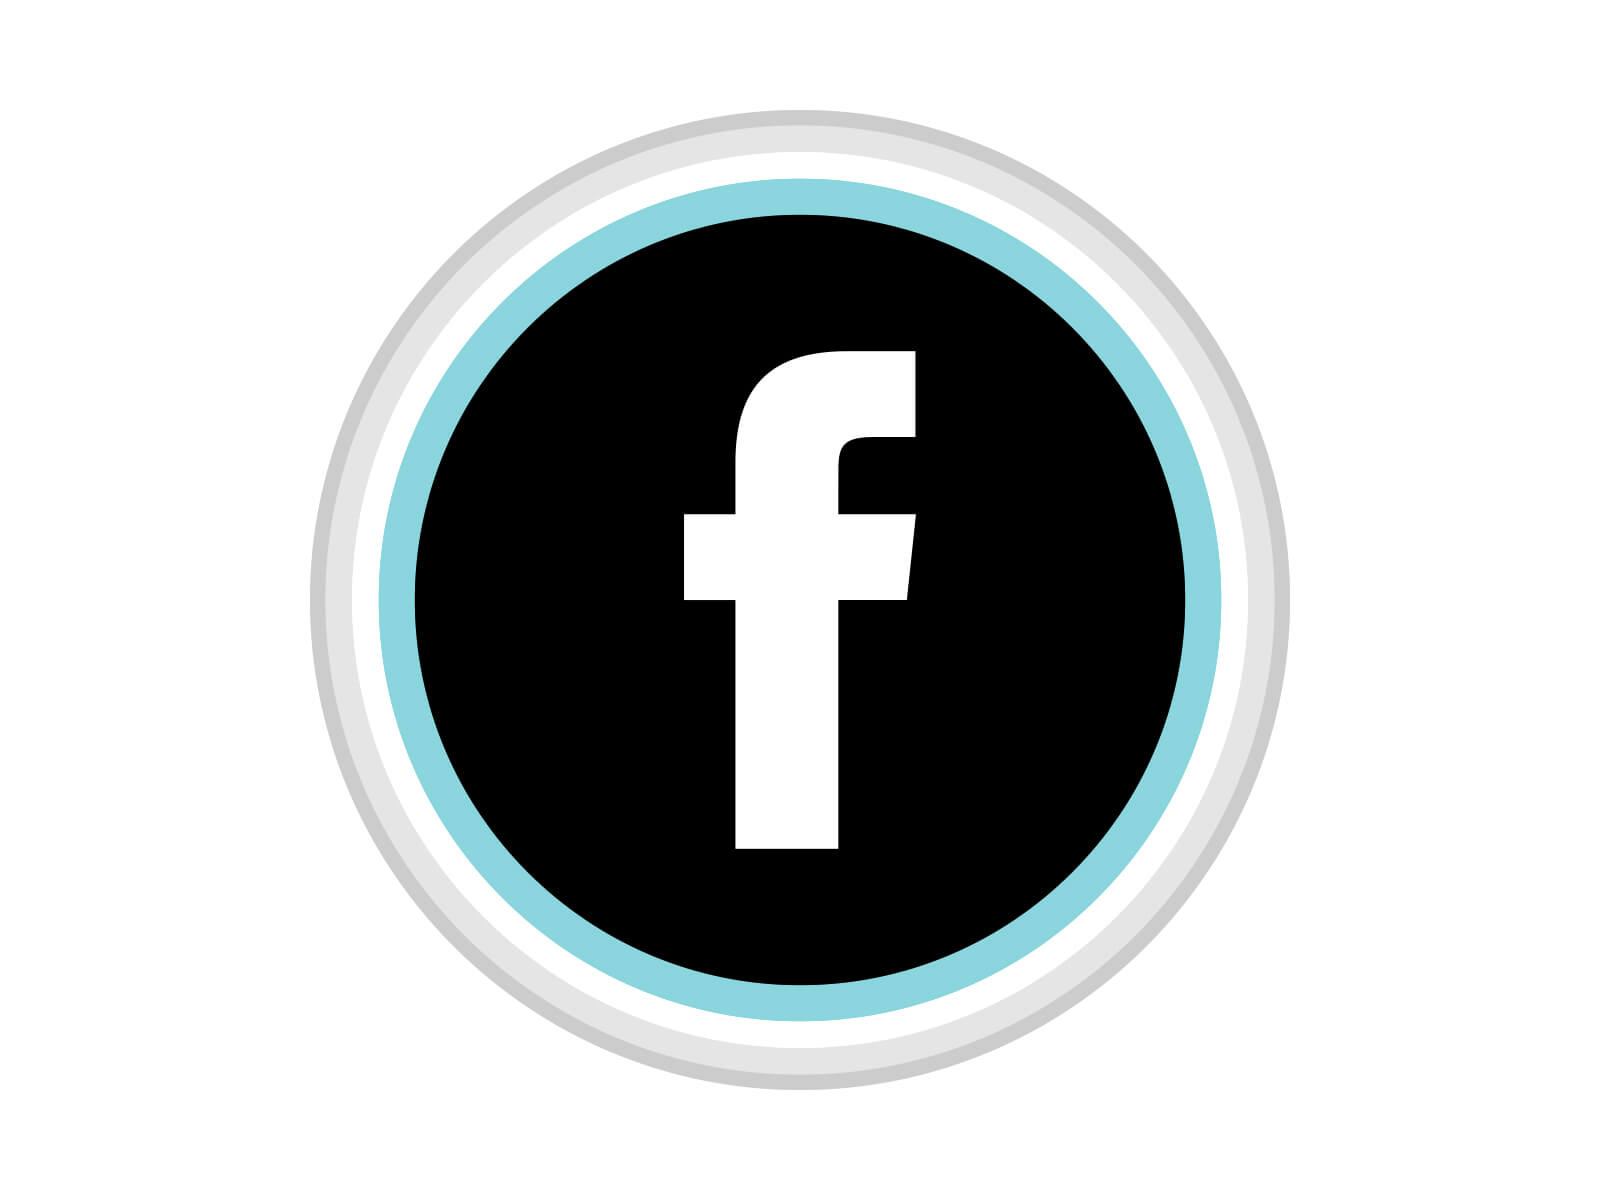 Free Facebook Social Media Icon Download by AlfredoCreates